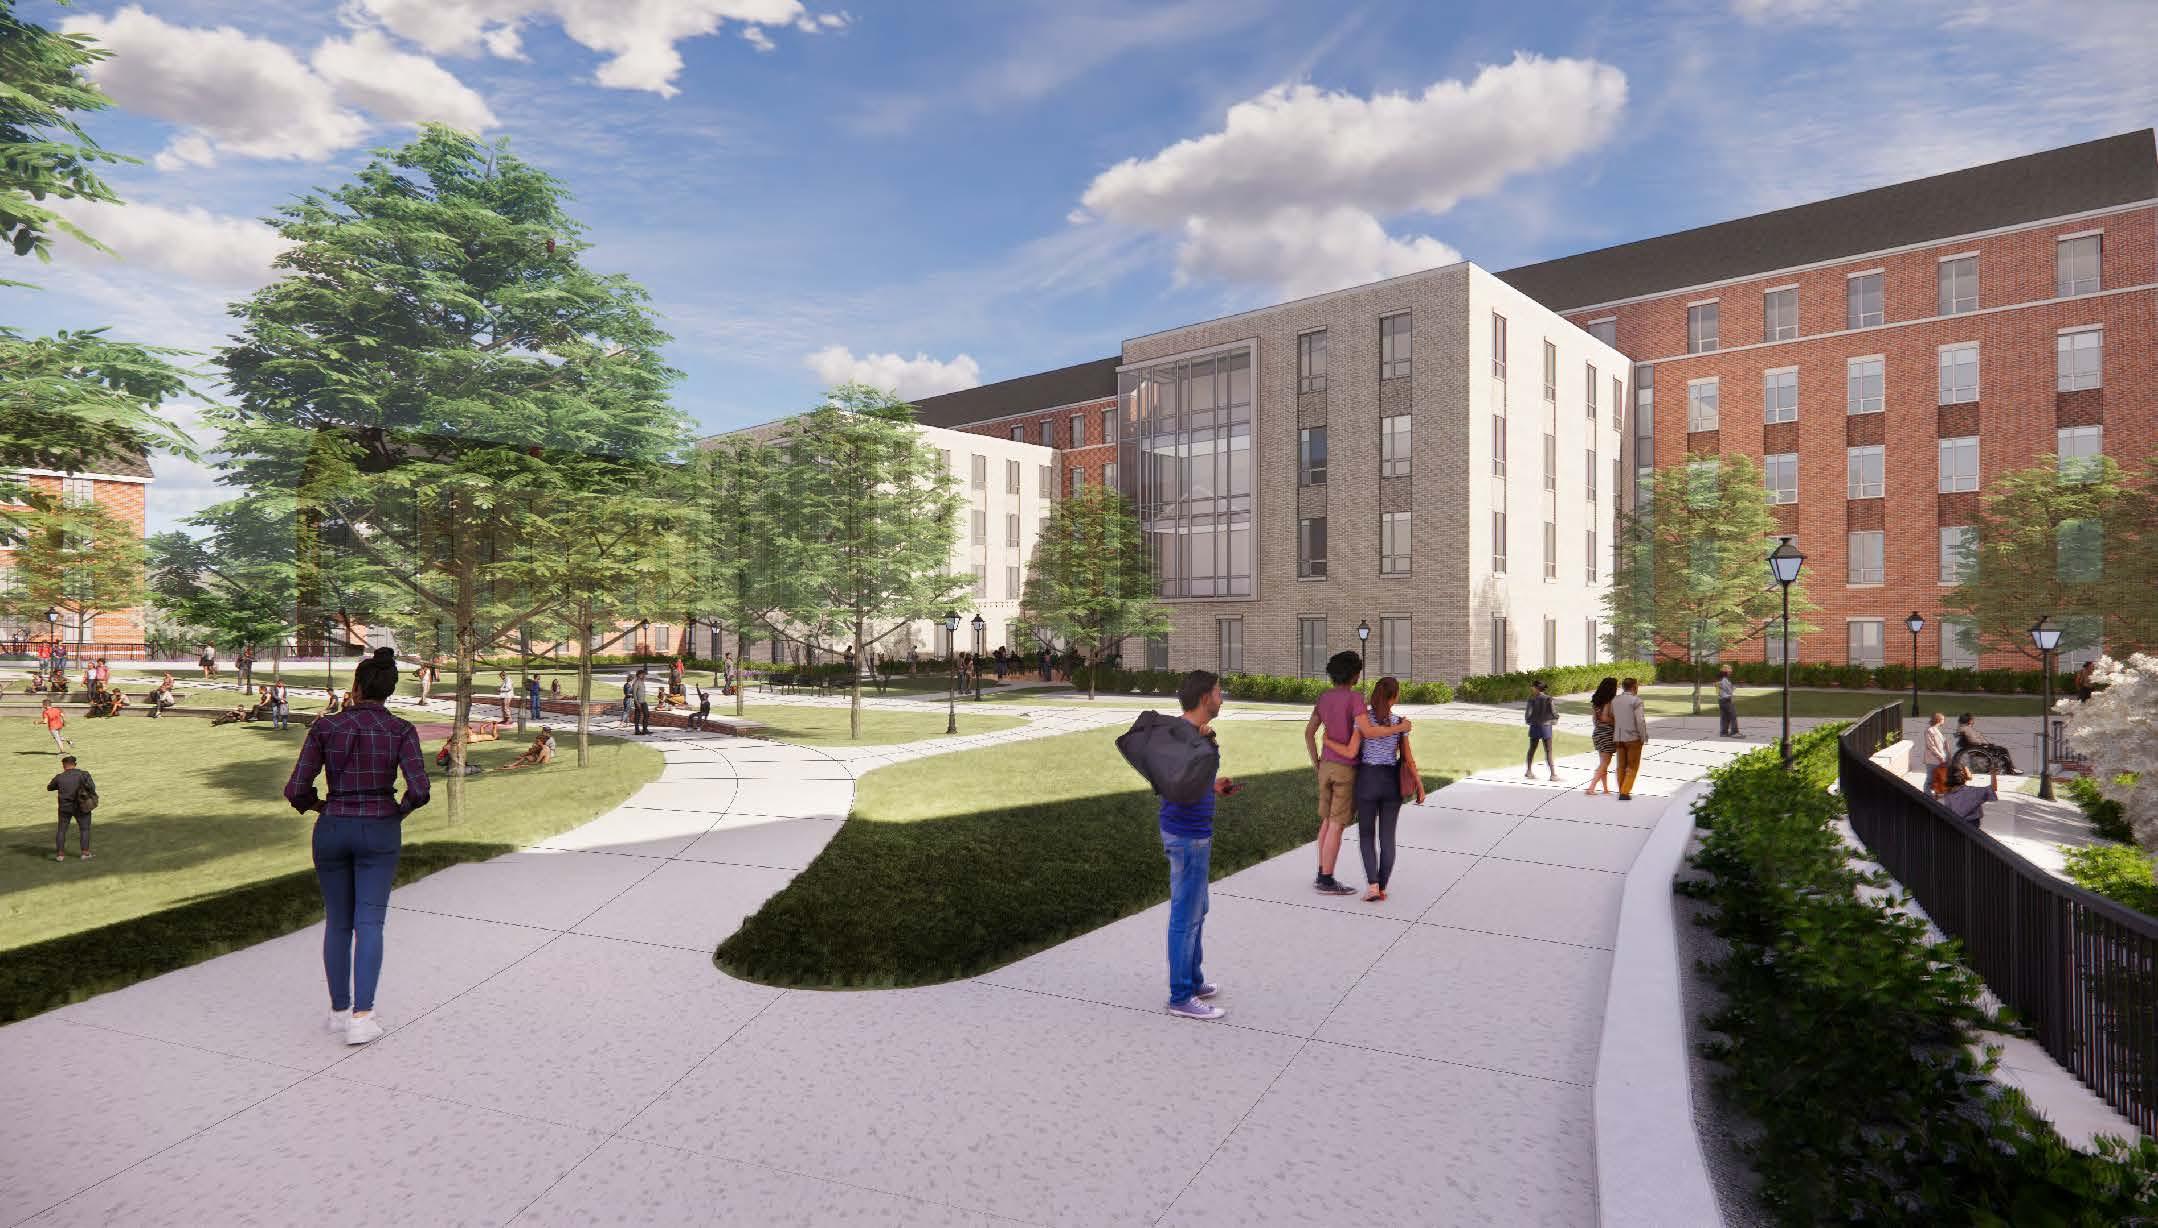 South green courtyard rendering for new South Green construction project